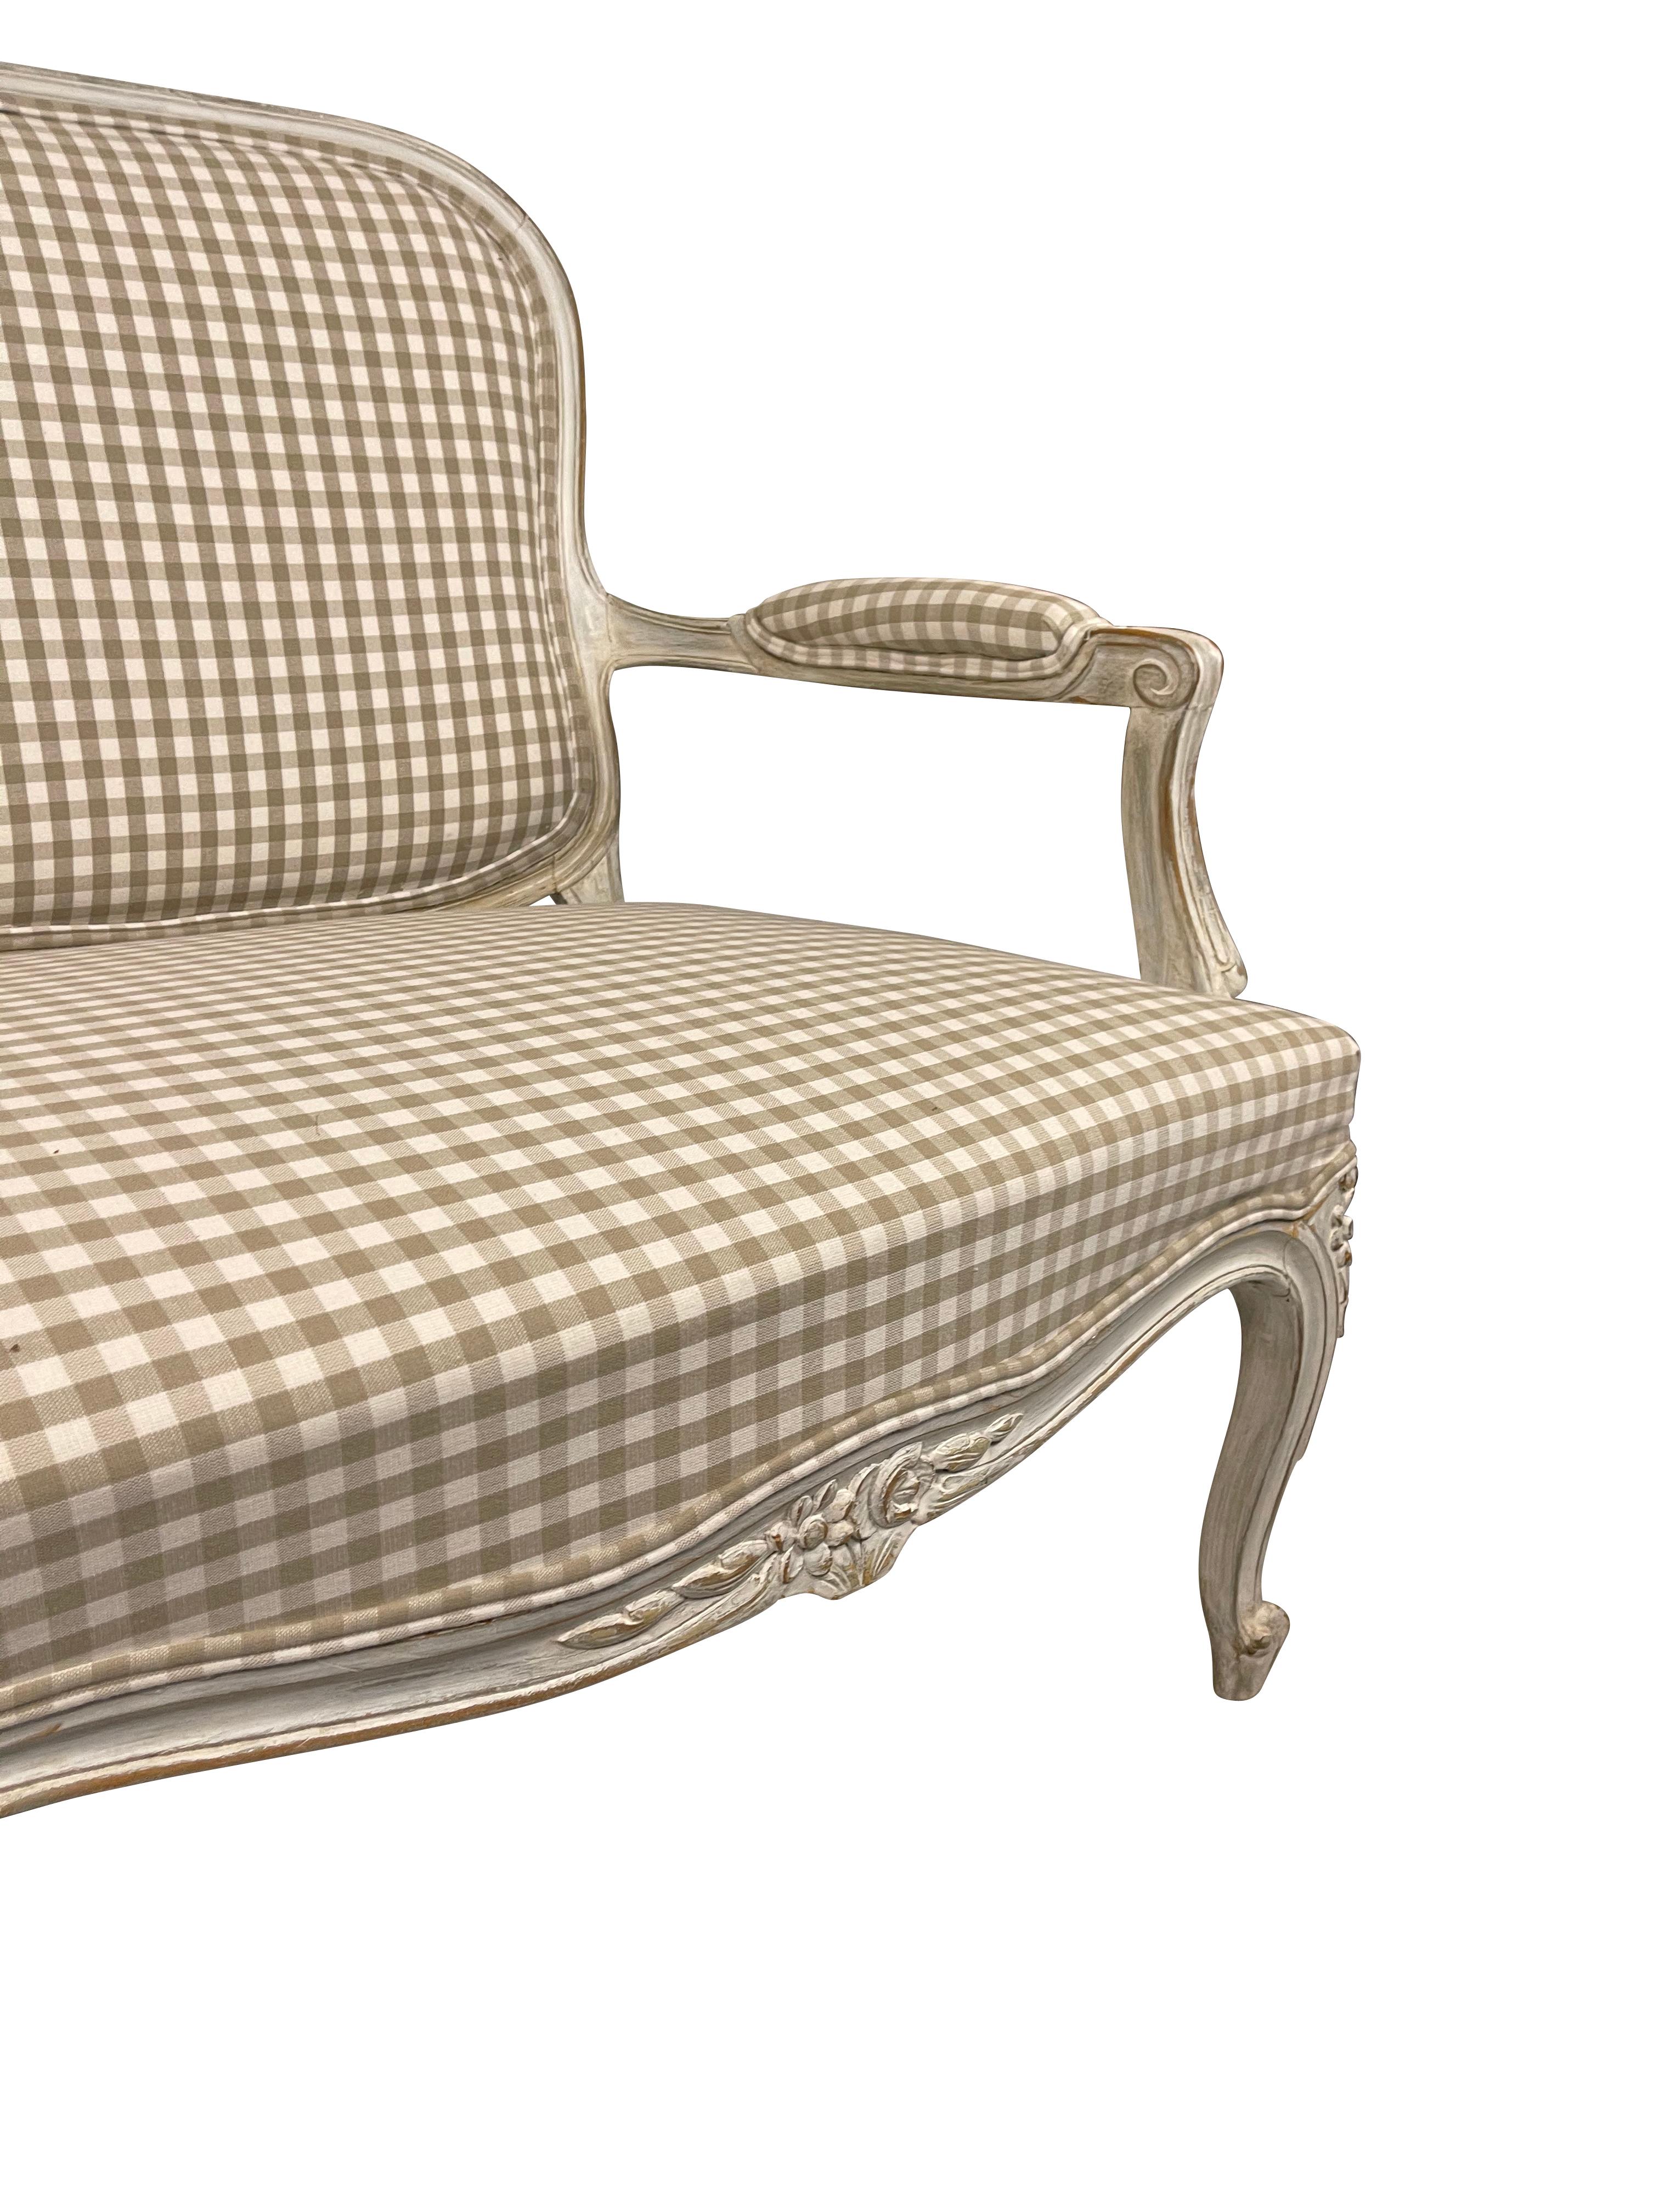 French Louis XV Settee with Grey Gingham  5